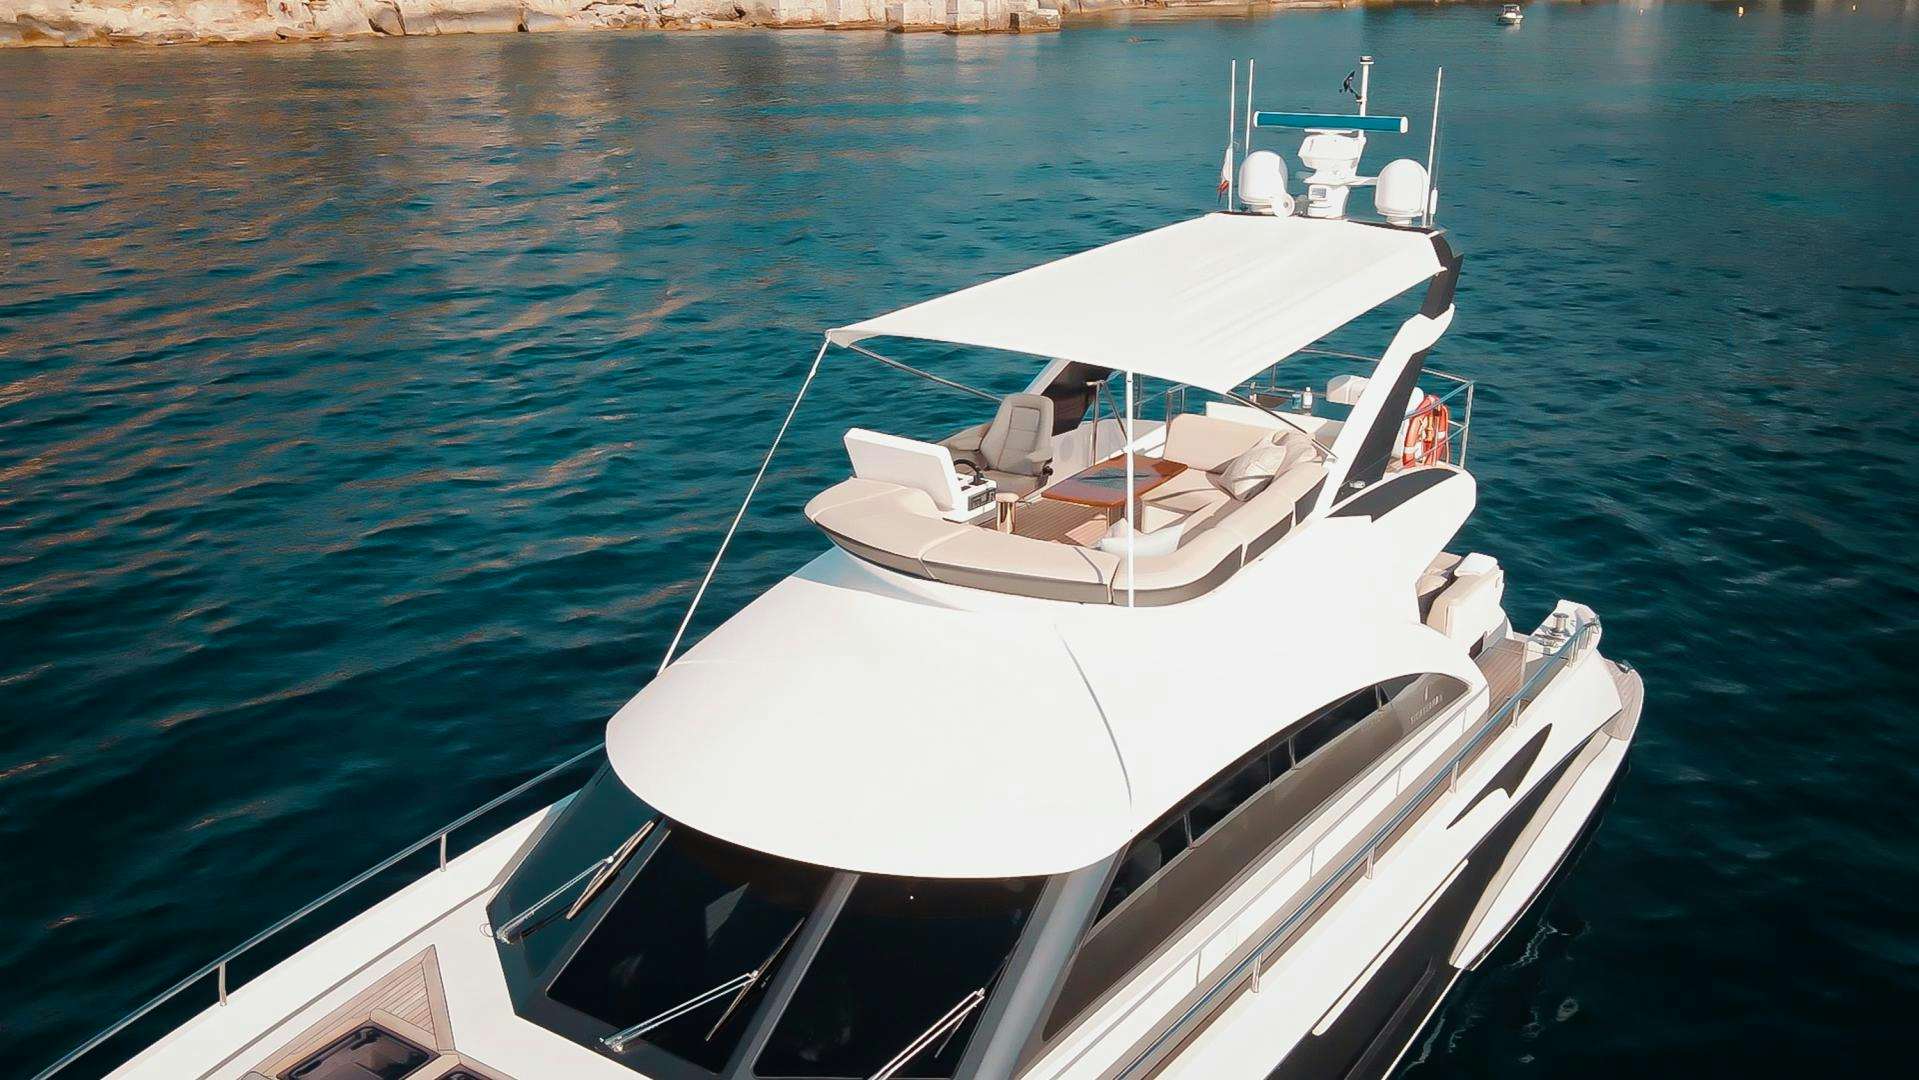 Sichterman's 15-metre boat will take you from Monaco to Ibiza on a single  tank - itBoat yacht magazine